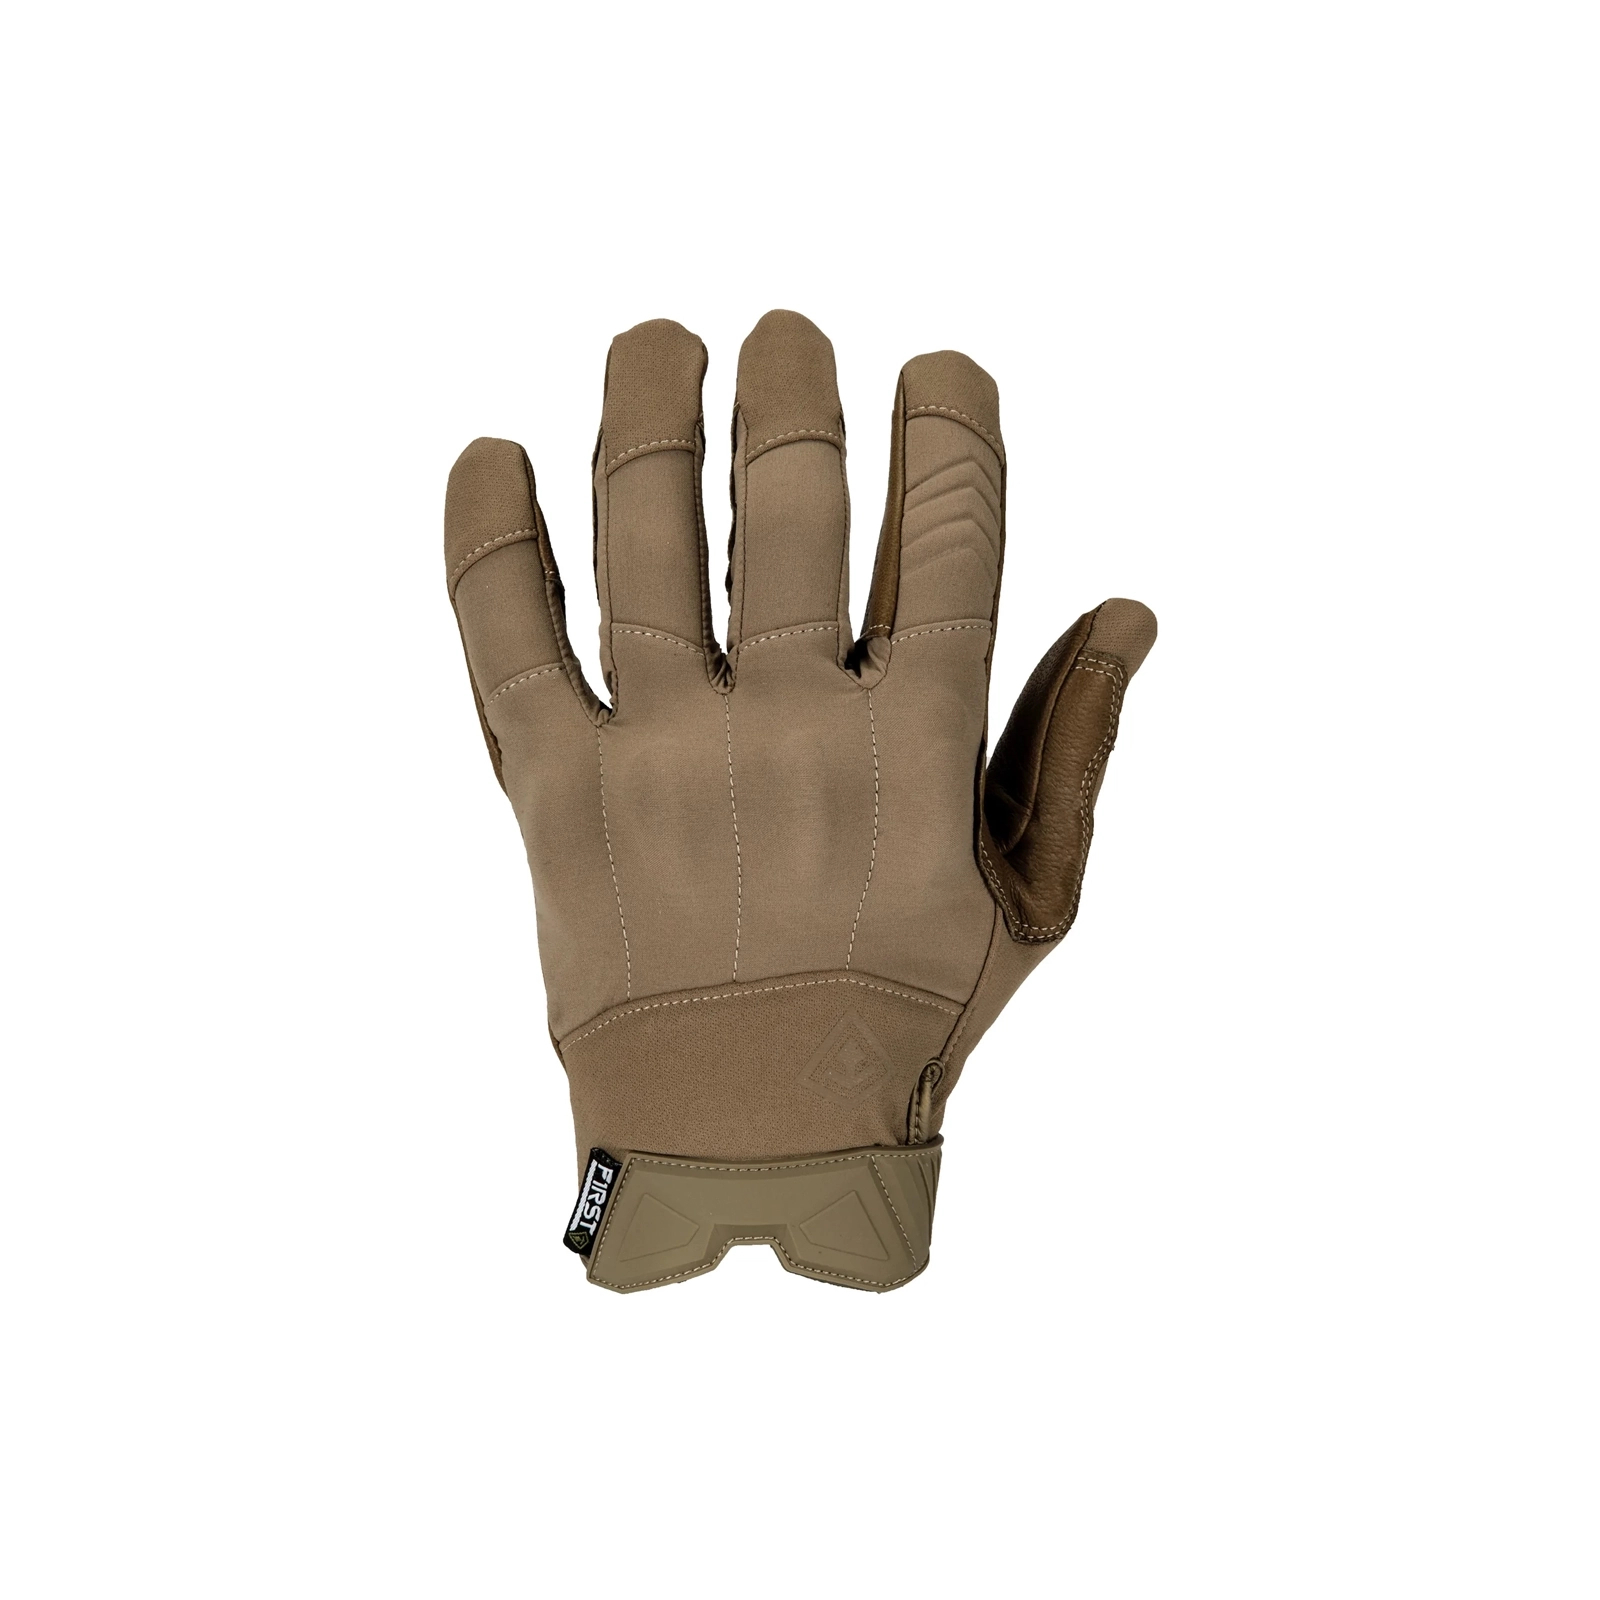 Тактичні рукавички First Tactical Mens Pro Knuckle Glove XL Coyote (150007-060-XL)